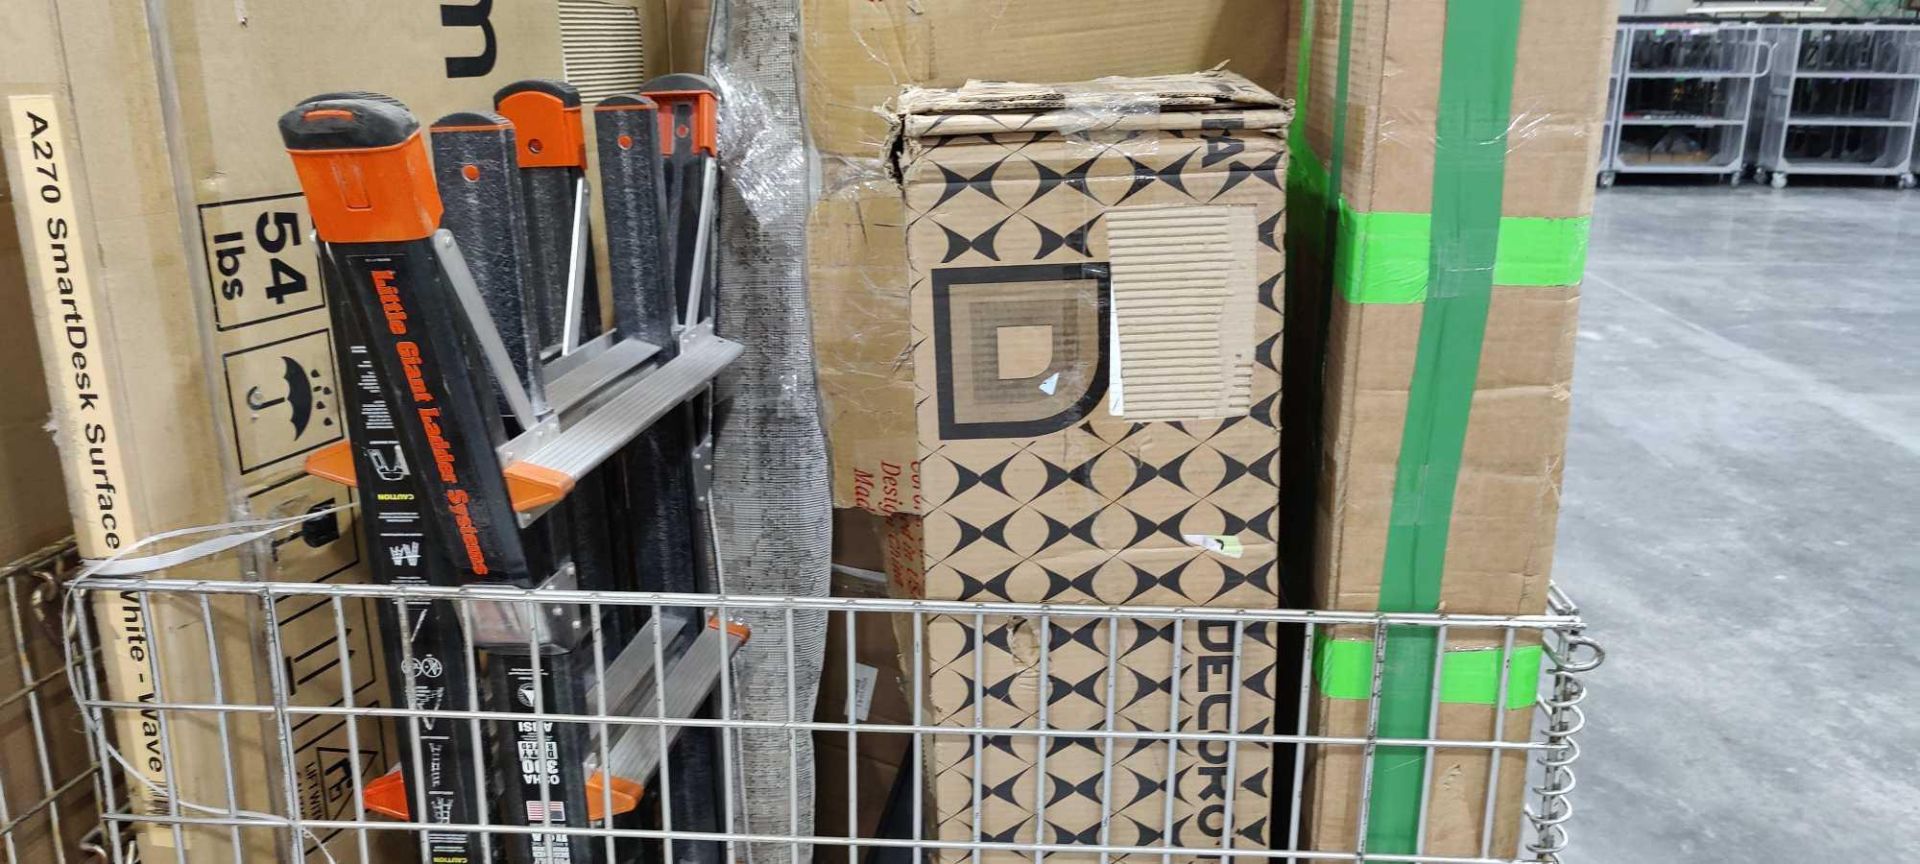 Two Pallets - Image 9 of 11